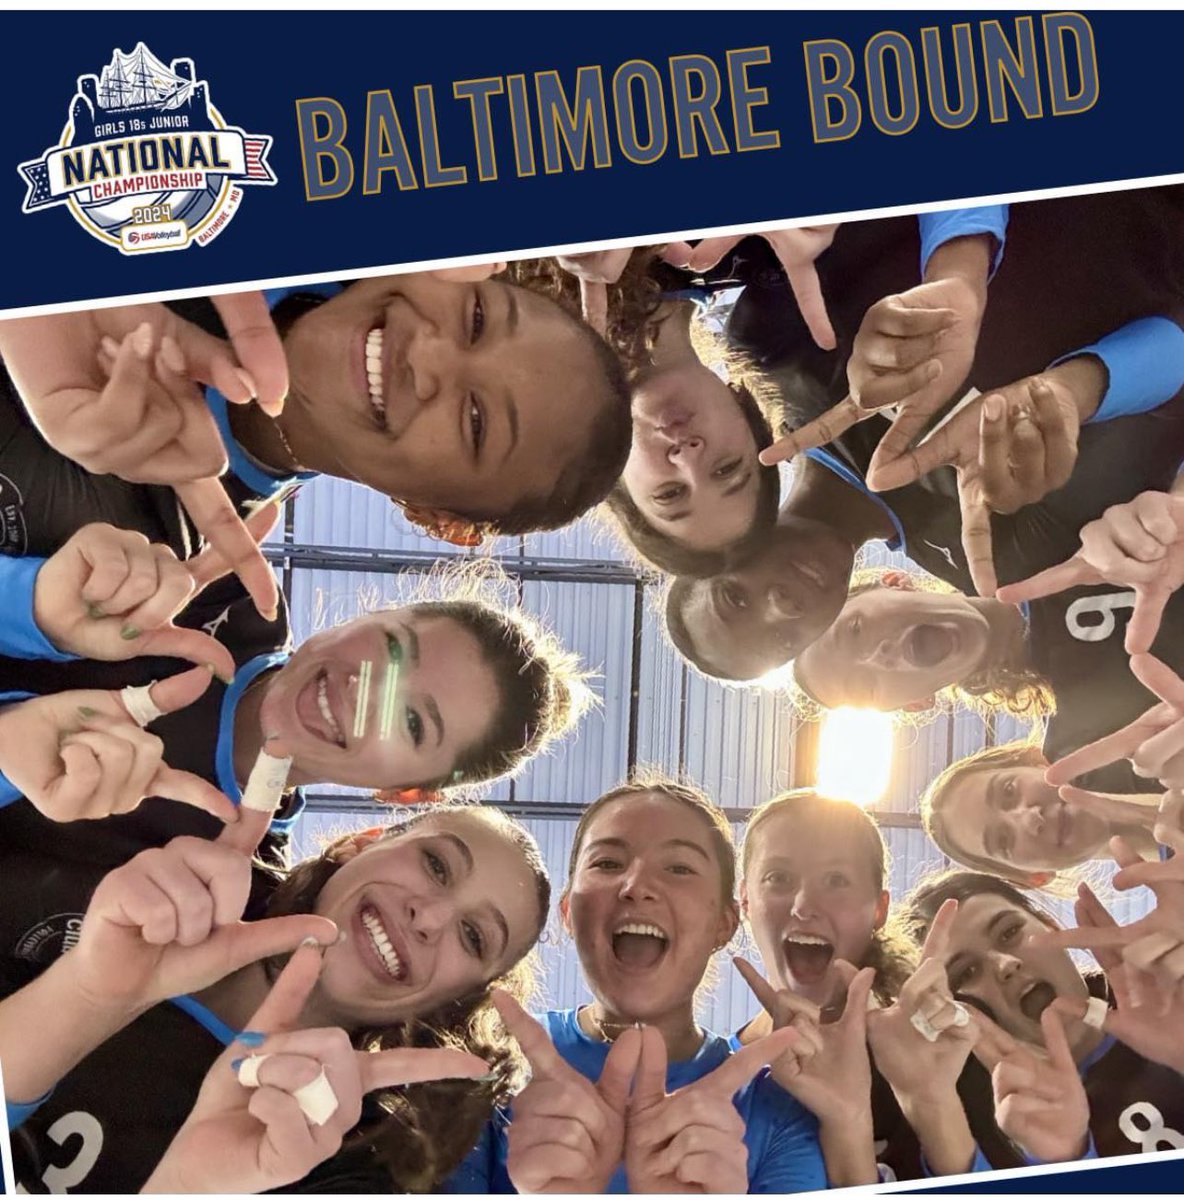 Bid secured!! So excited to be headed to MD in April with these amazing girls! We
fought hard!! #clubvolleyball #team #nationalchampionship #outsidehitter #volleyballgirls #clubseason #classof2025 #volleyball